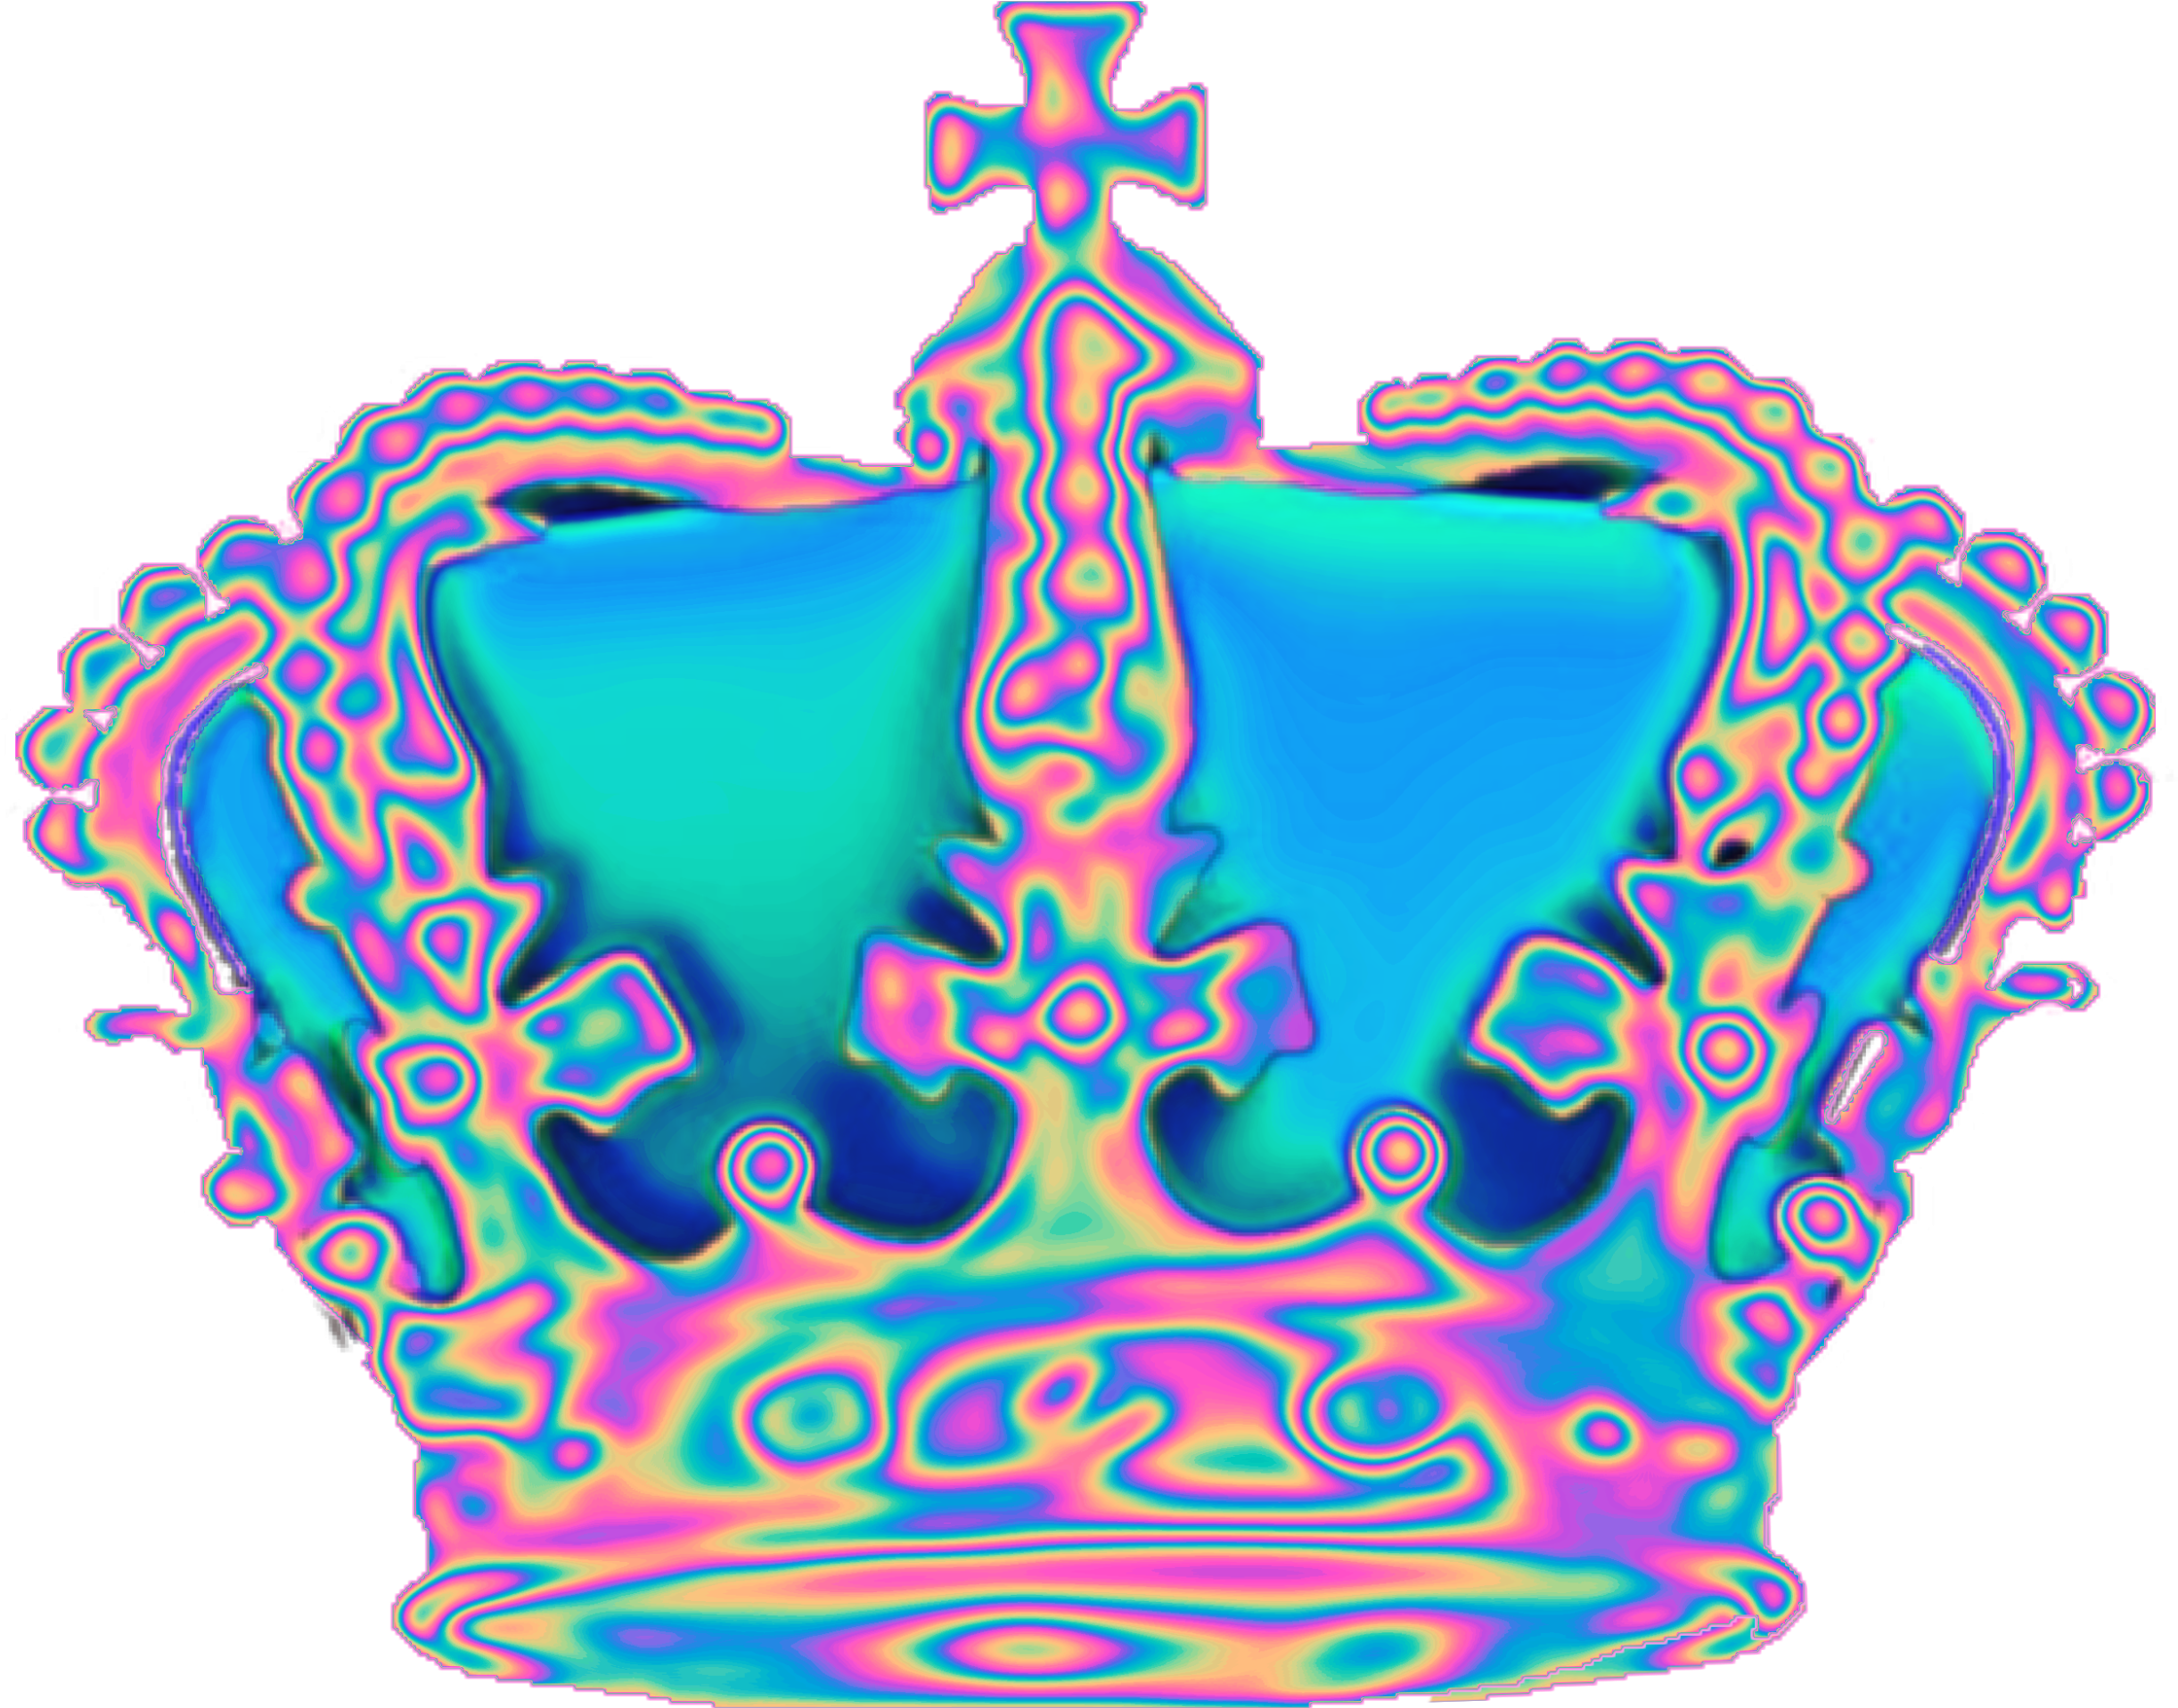 Download Holo Holographic Tumblr Vaporwave Aesthetic Crown Freet